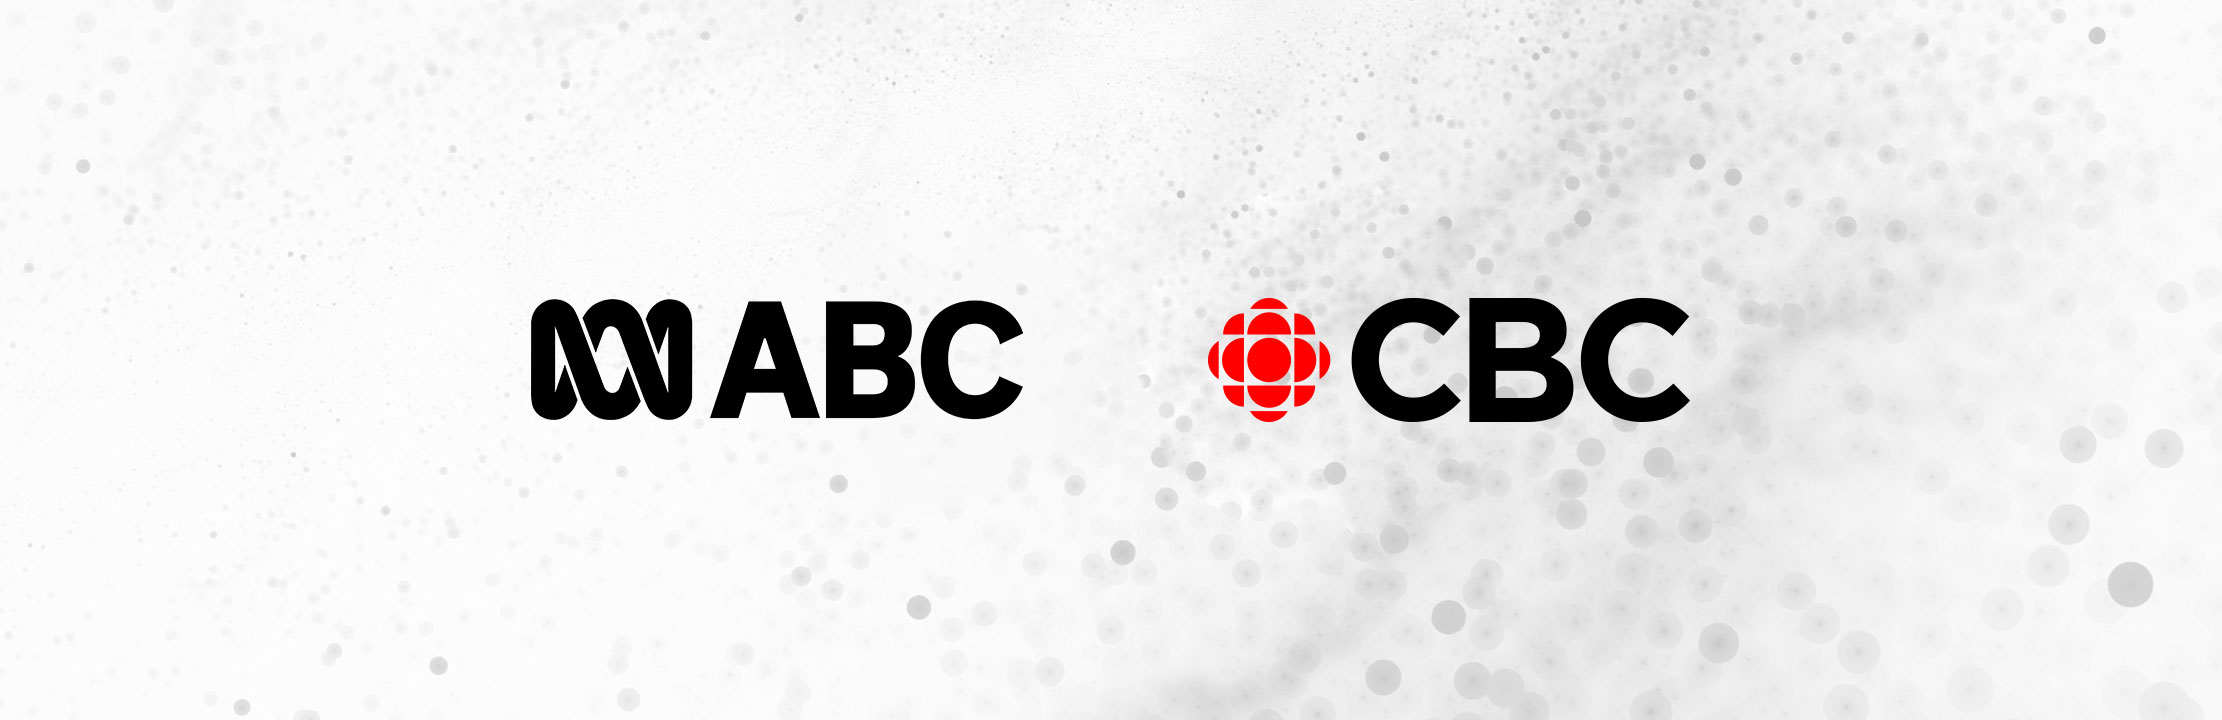 National Public Broadcasters Abc And Cbc Announce Creative And Commercial Collaboration